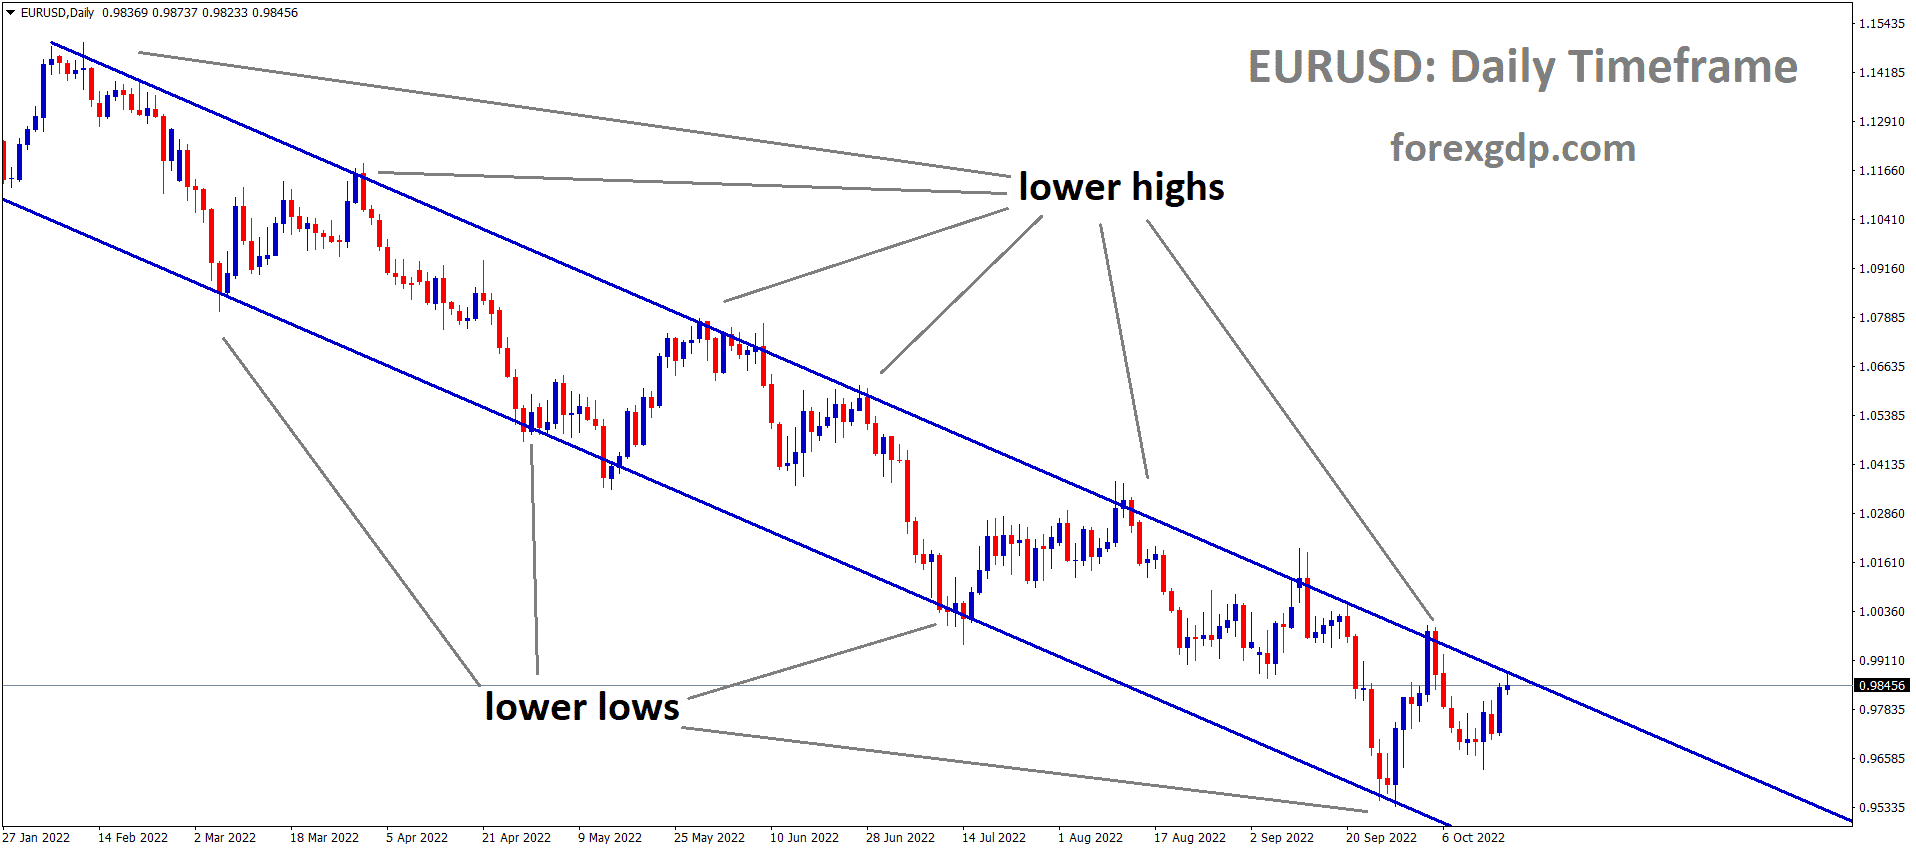 EURUSD is moving in the Descending channel and the market has reached the Lower high area of the channel 4